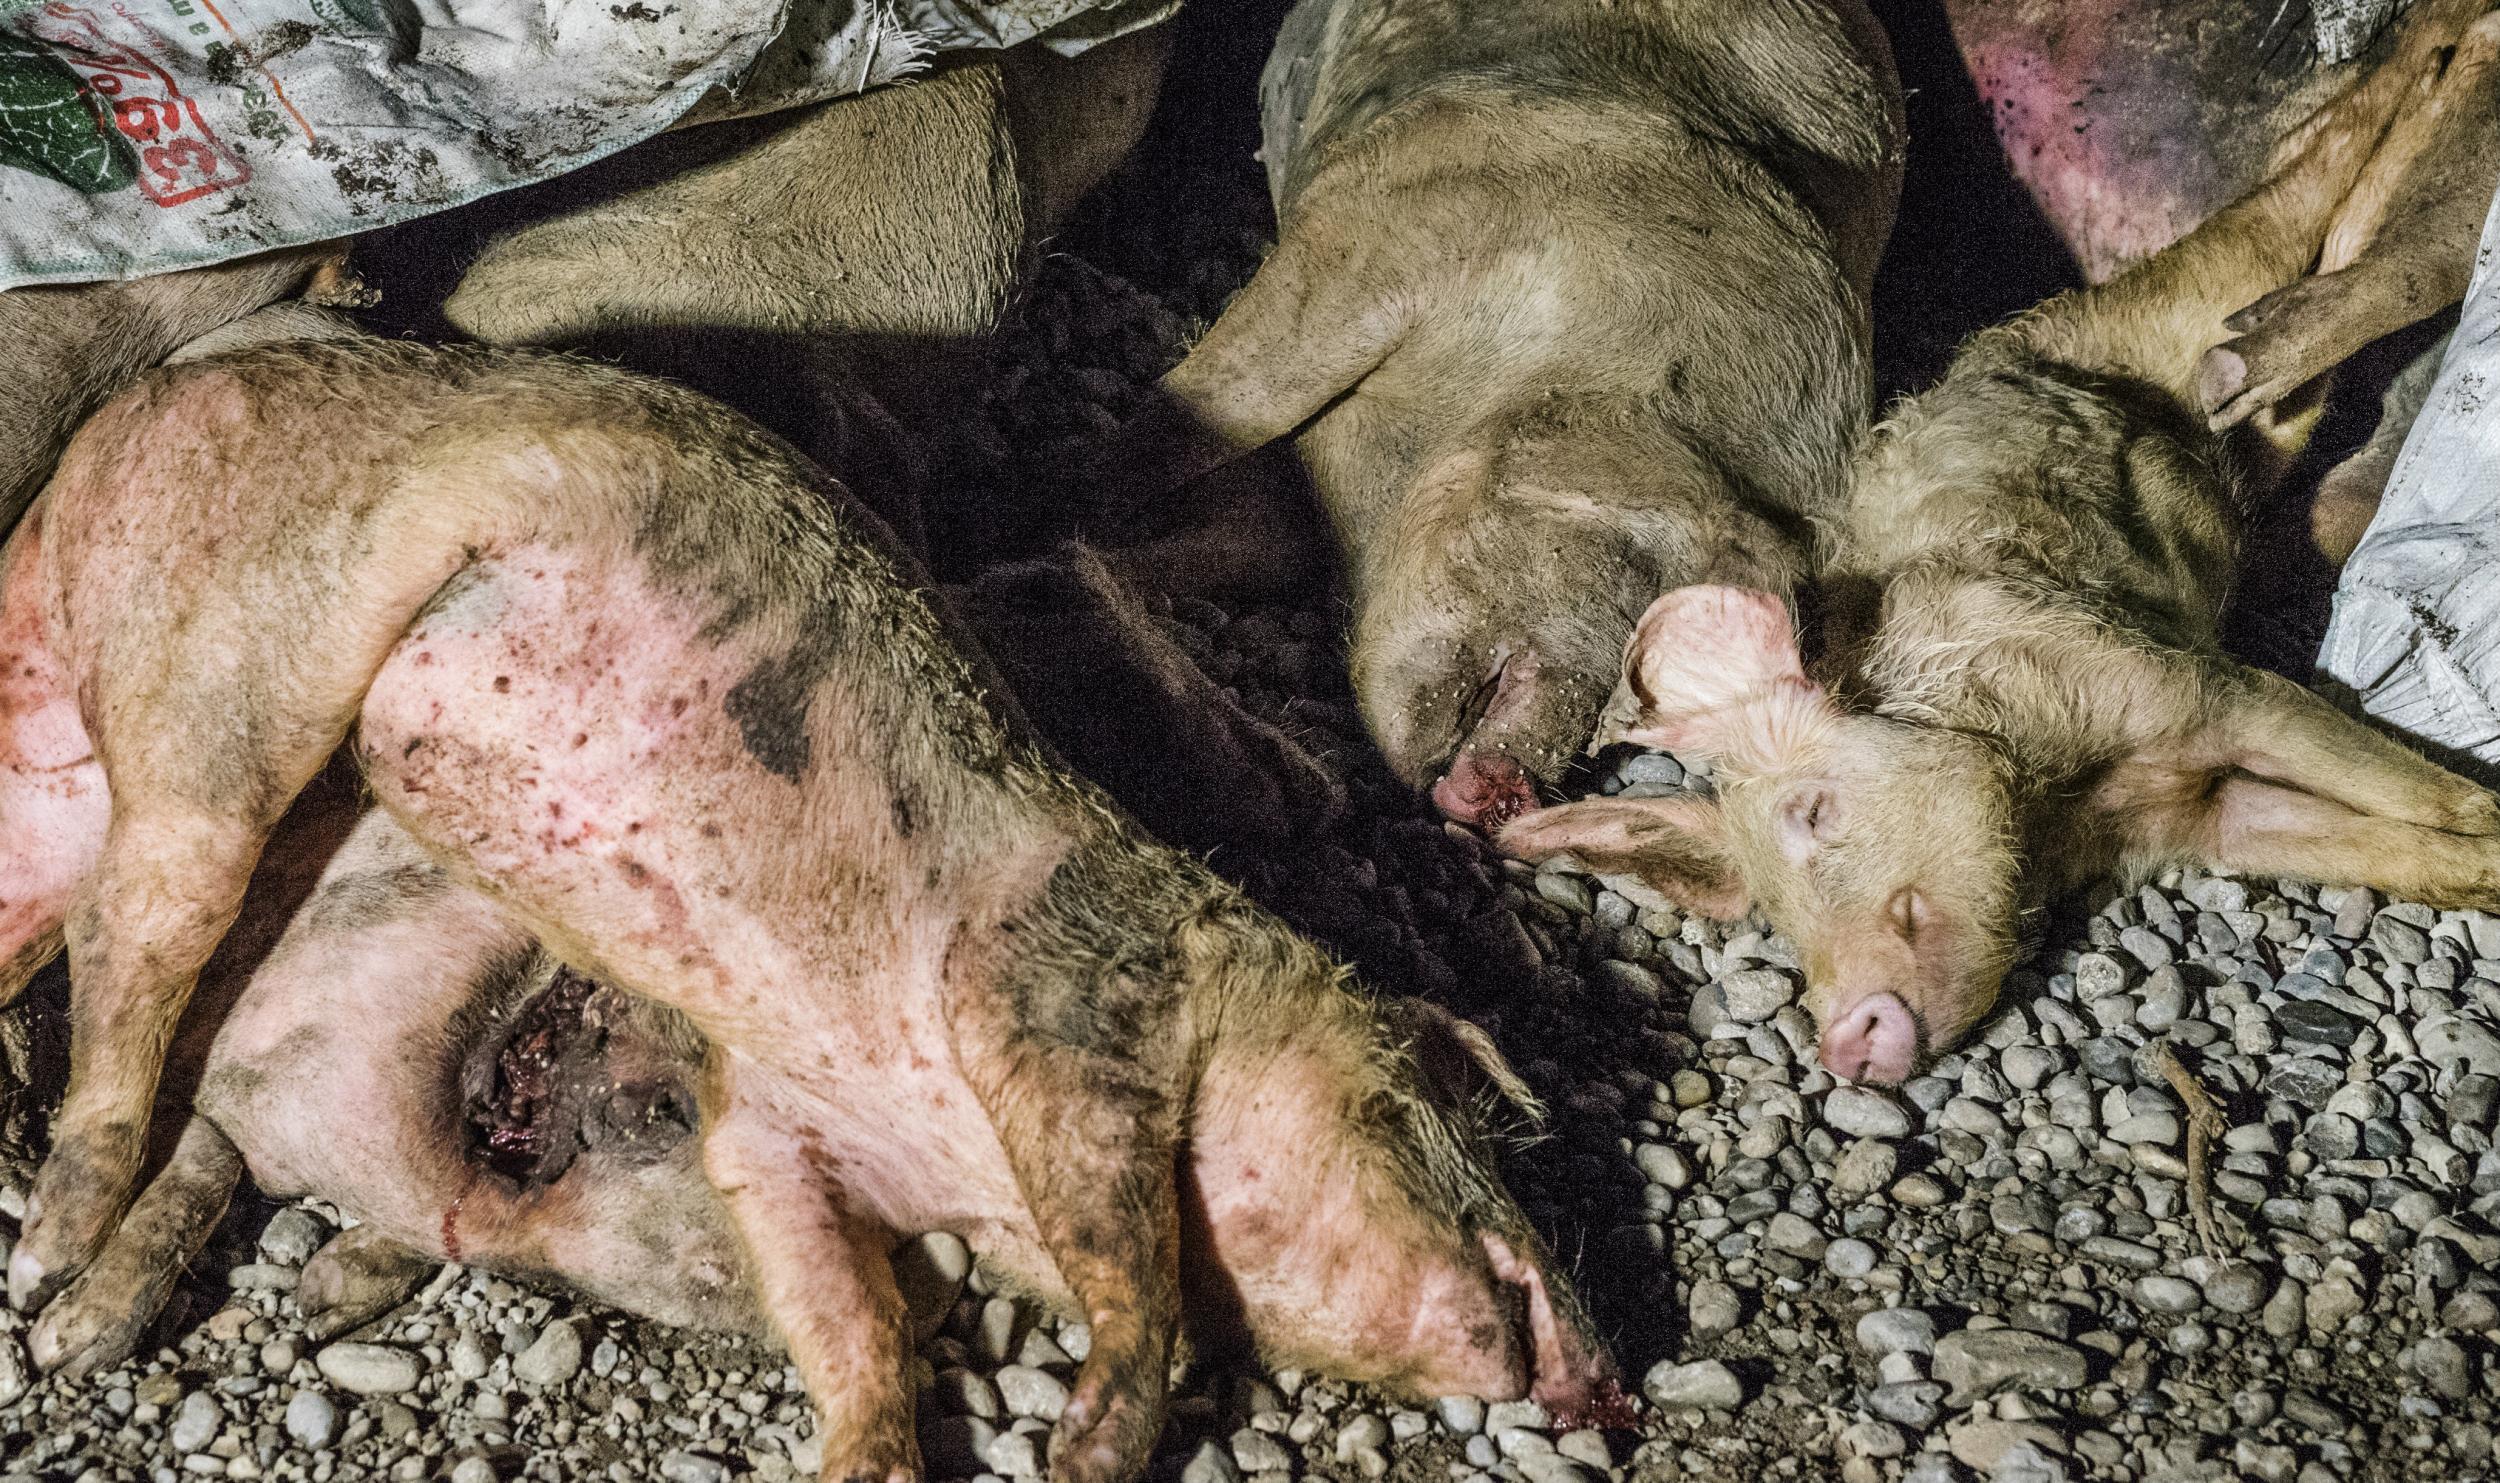 &#13;
Bodies of diseased pigs were left dumped close to living animals?(LAV)&#13;